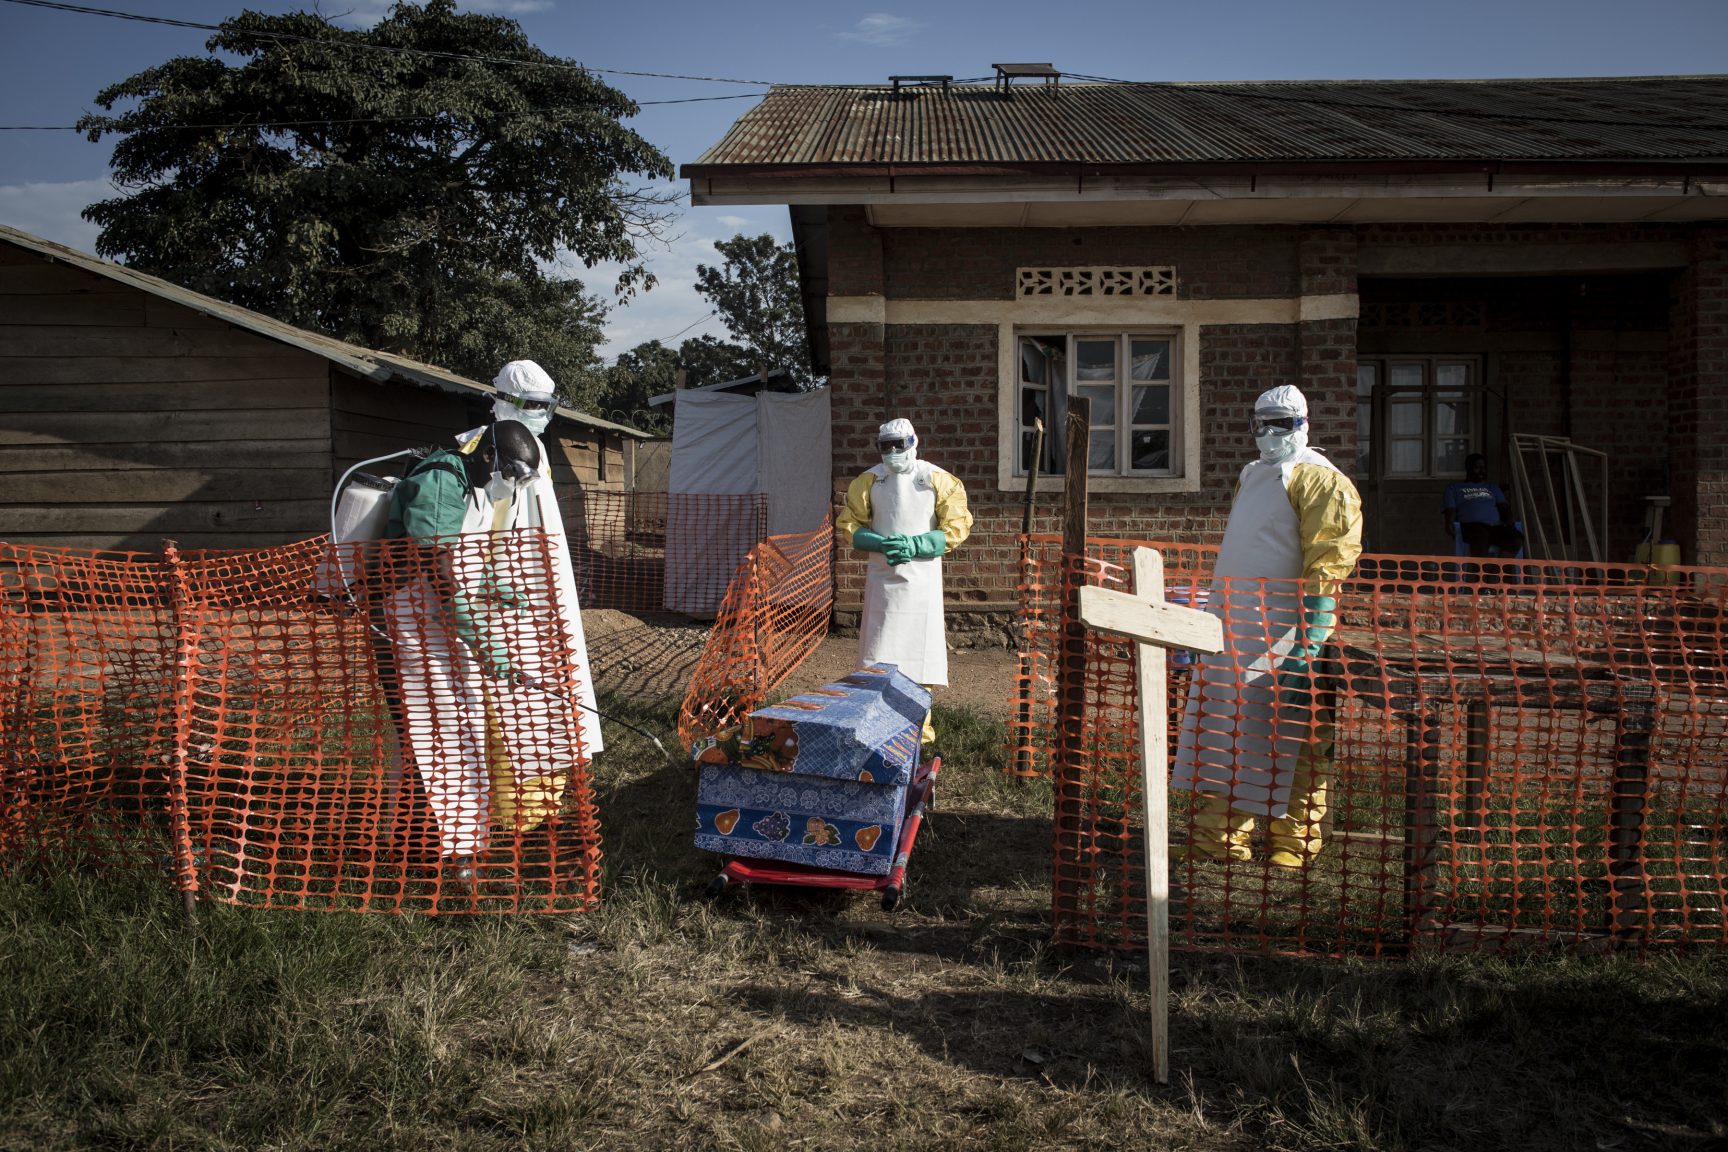 Ebola death toll hits 4 in DR Congo as people ‘resist’ measures